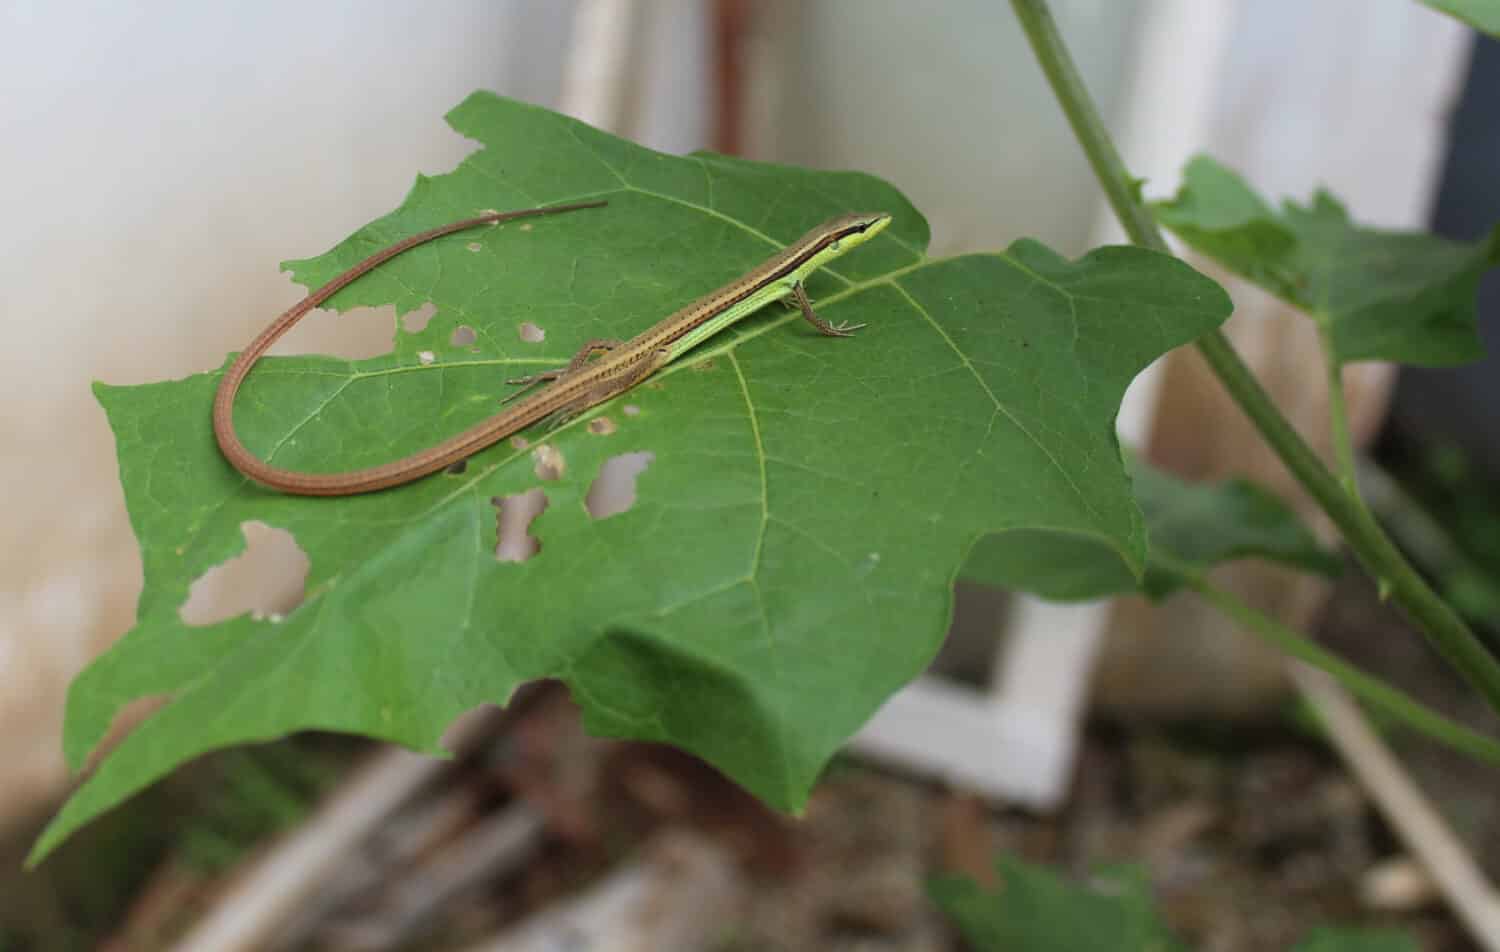 The long-tailed grass lizard basking on the eggplant leaf. Its body is long and slender. This lizard is widespread in tropical Southeast Asia. Sundanese people call it Orong-orong.